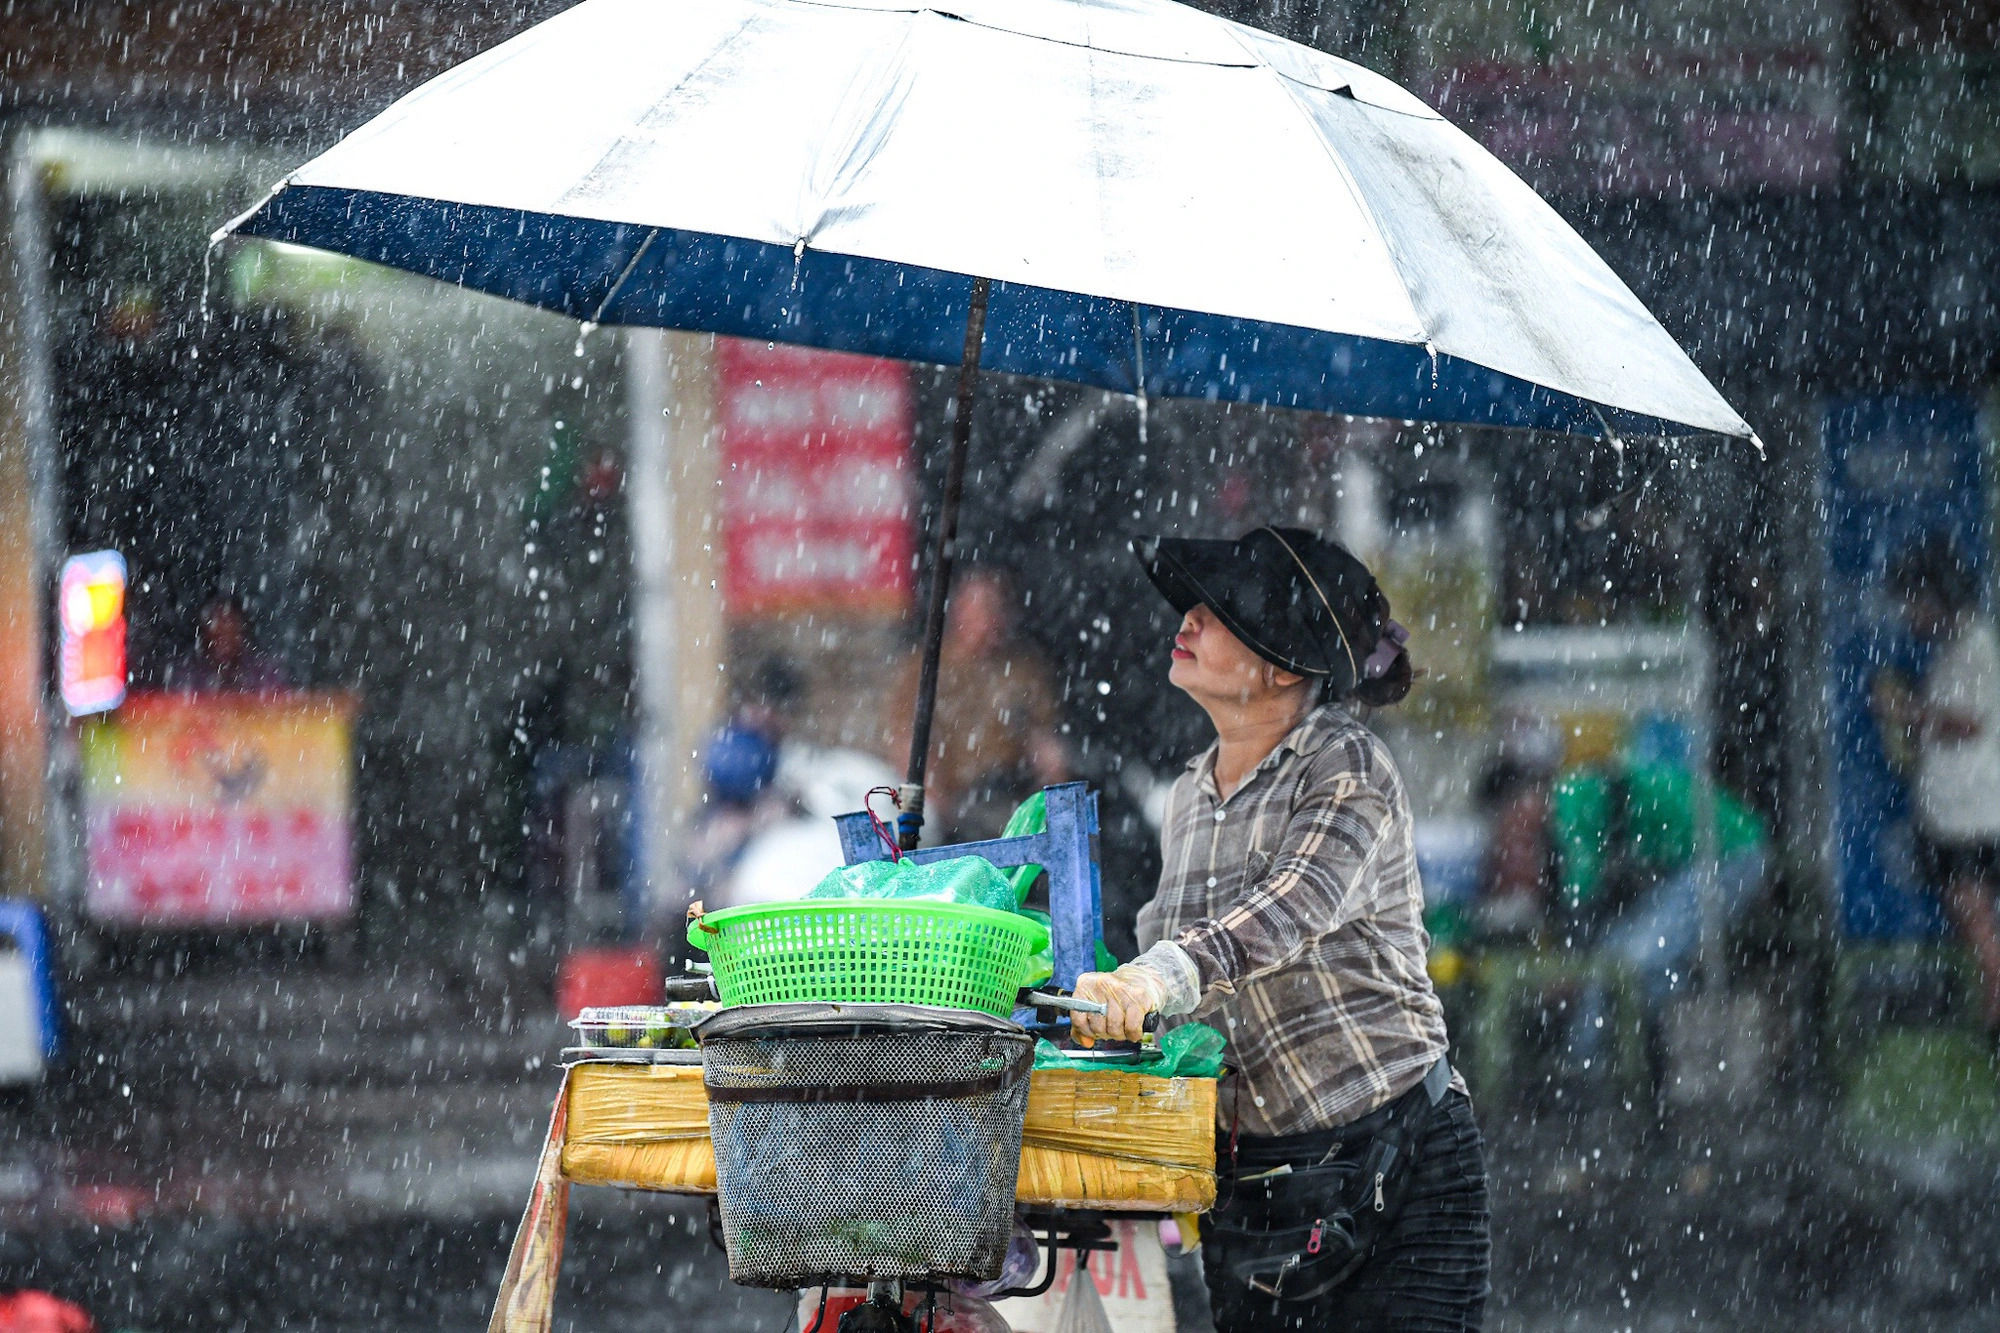 Heavy rainfall expected in central Vietnam over next week